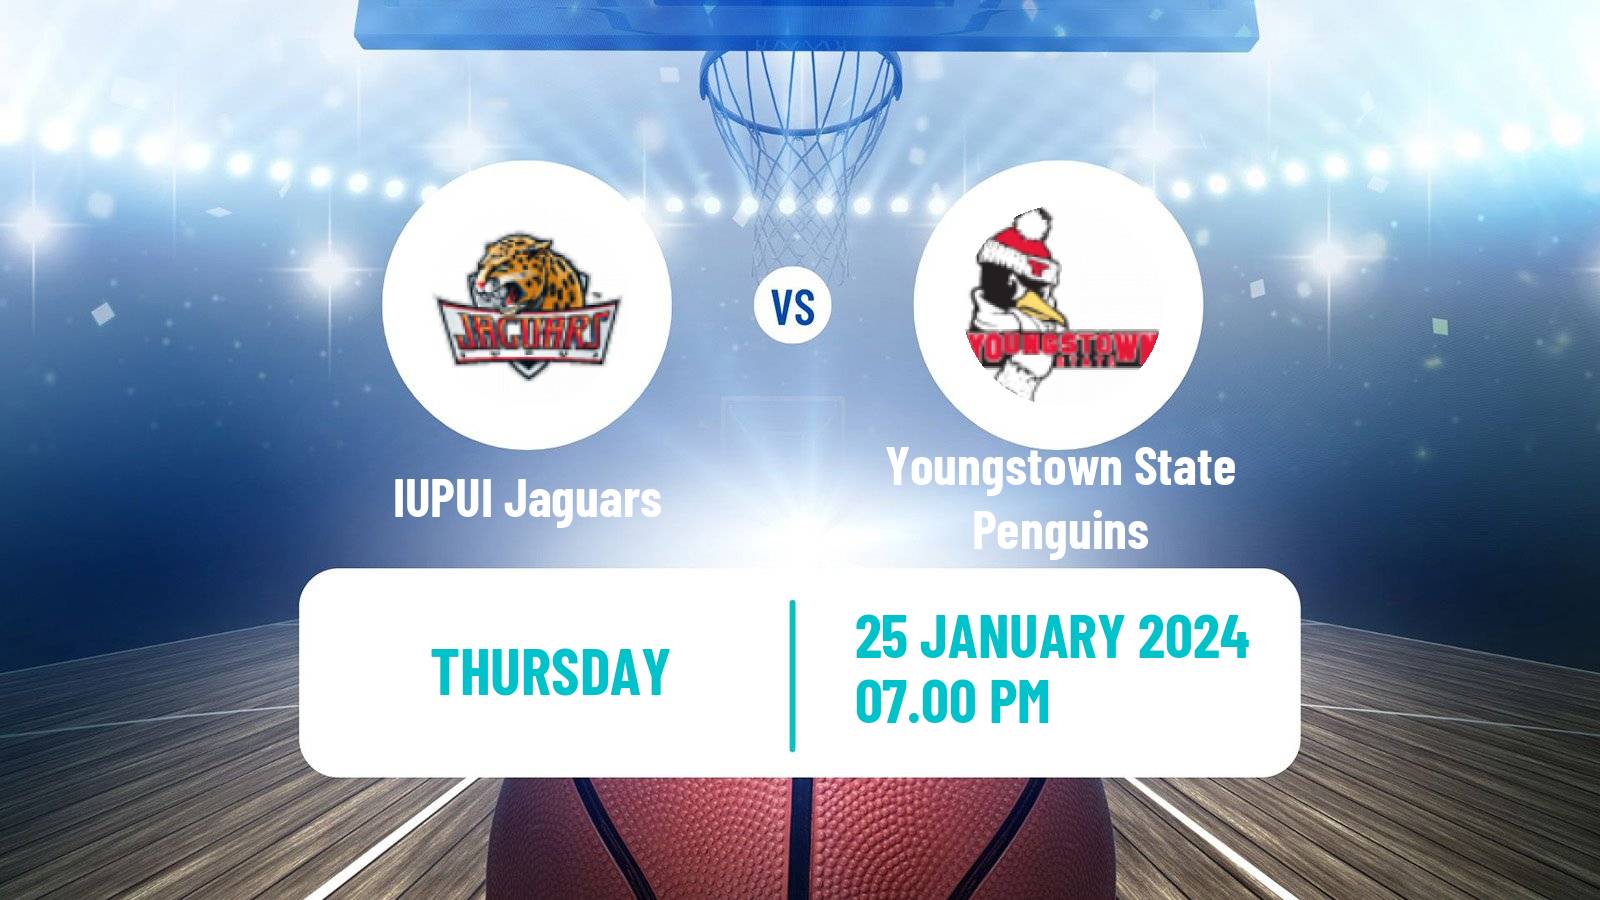 Basketball NCAA College Basketball IUPUI Jaguars - Youngstown State Penguins